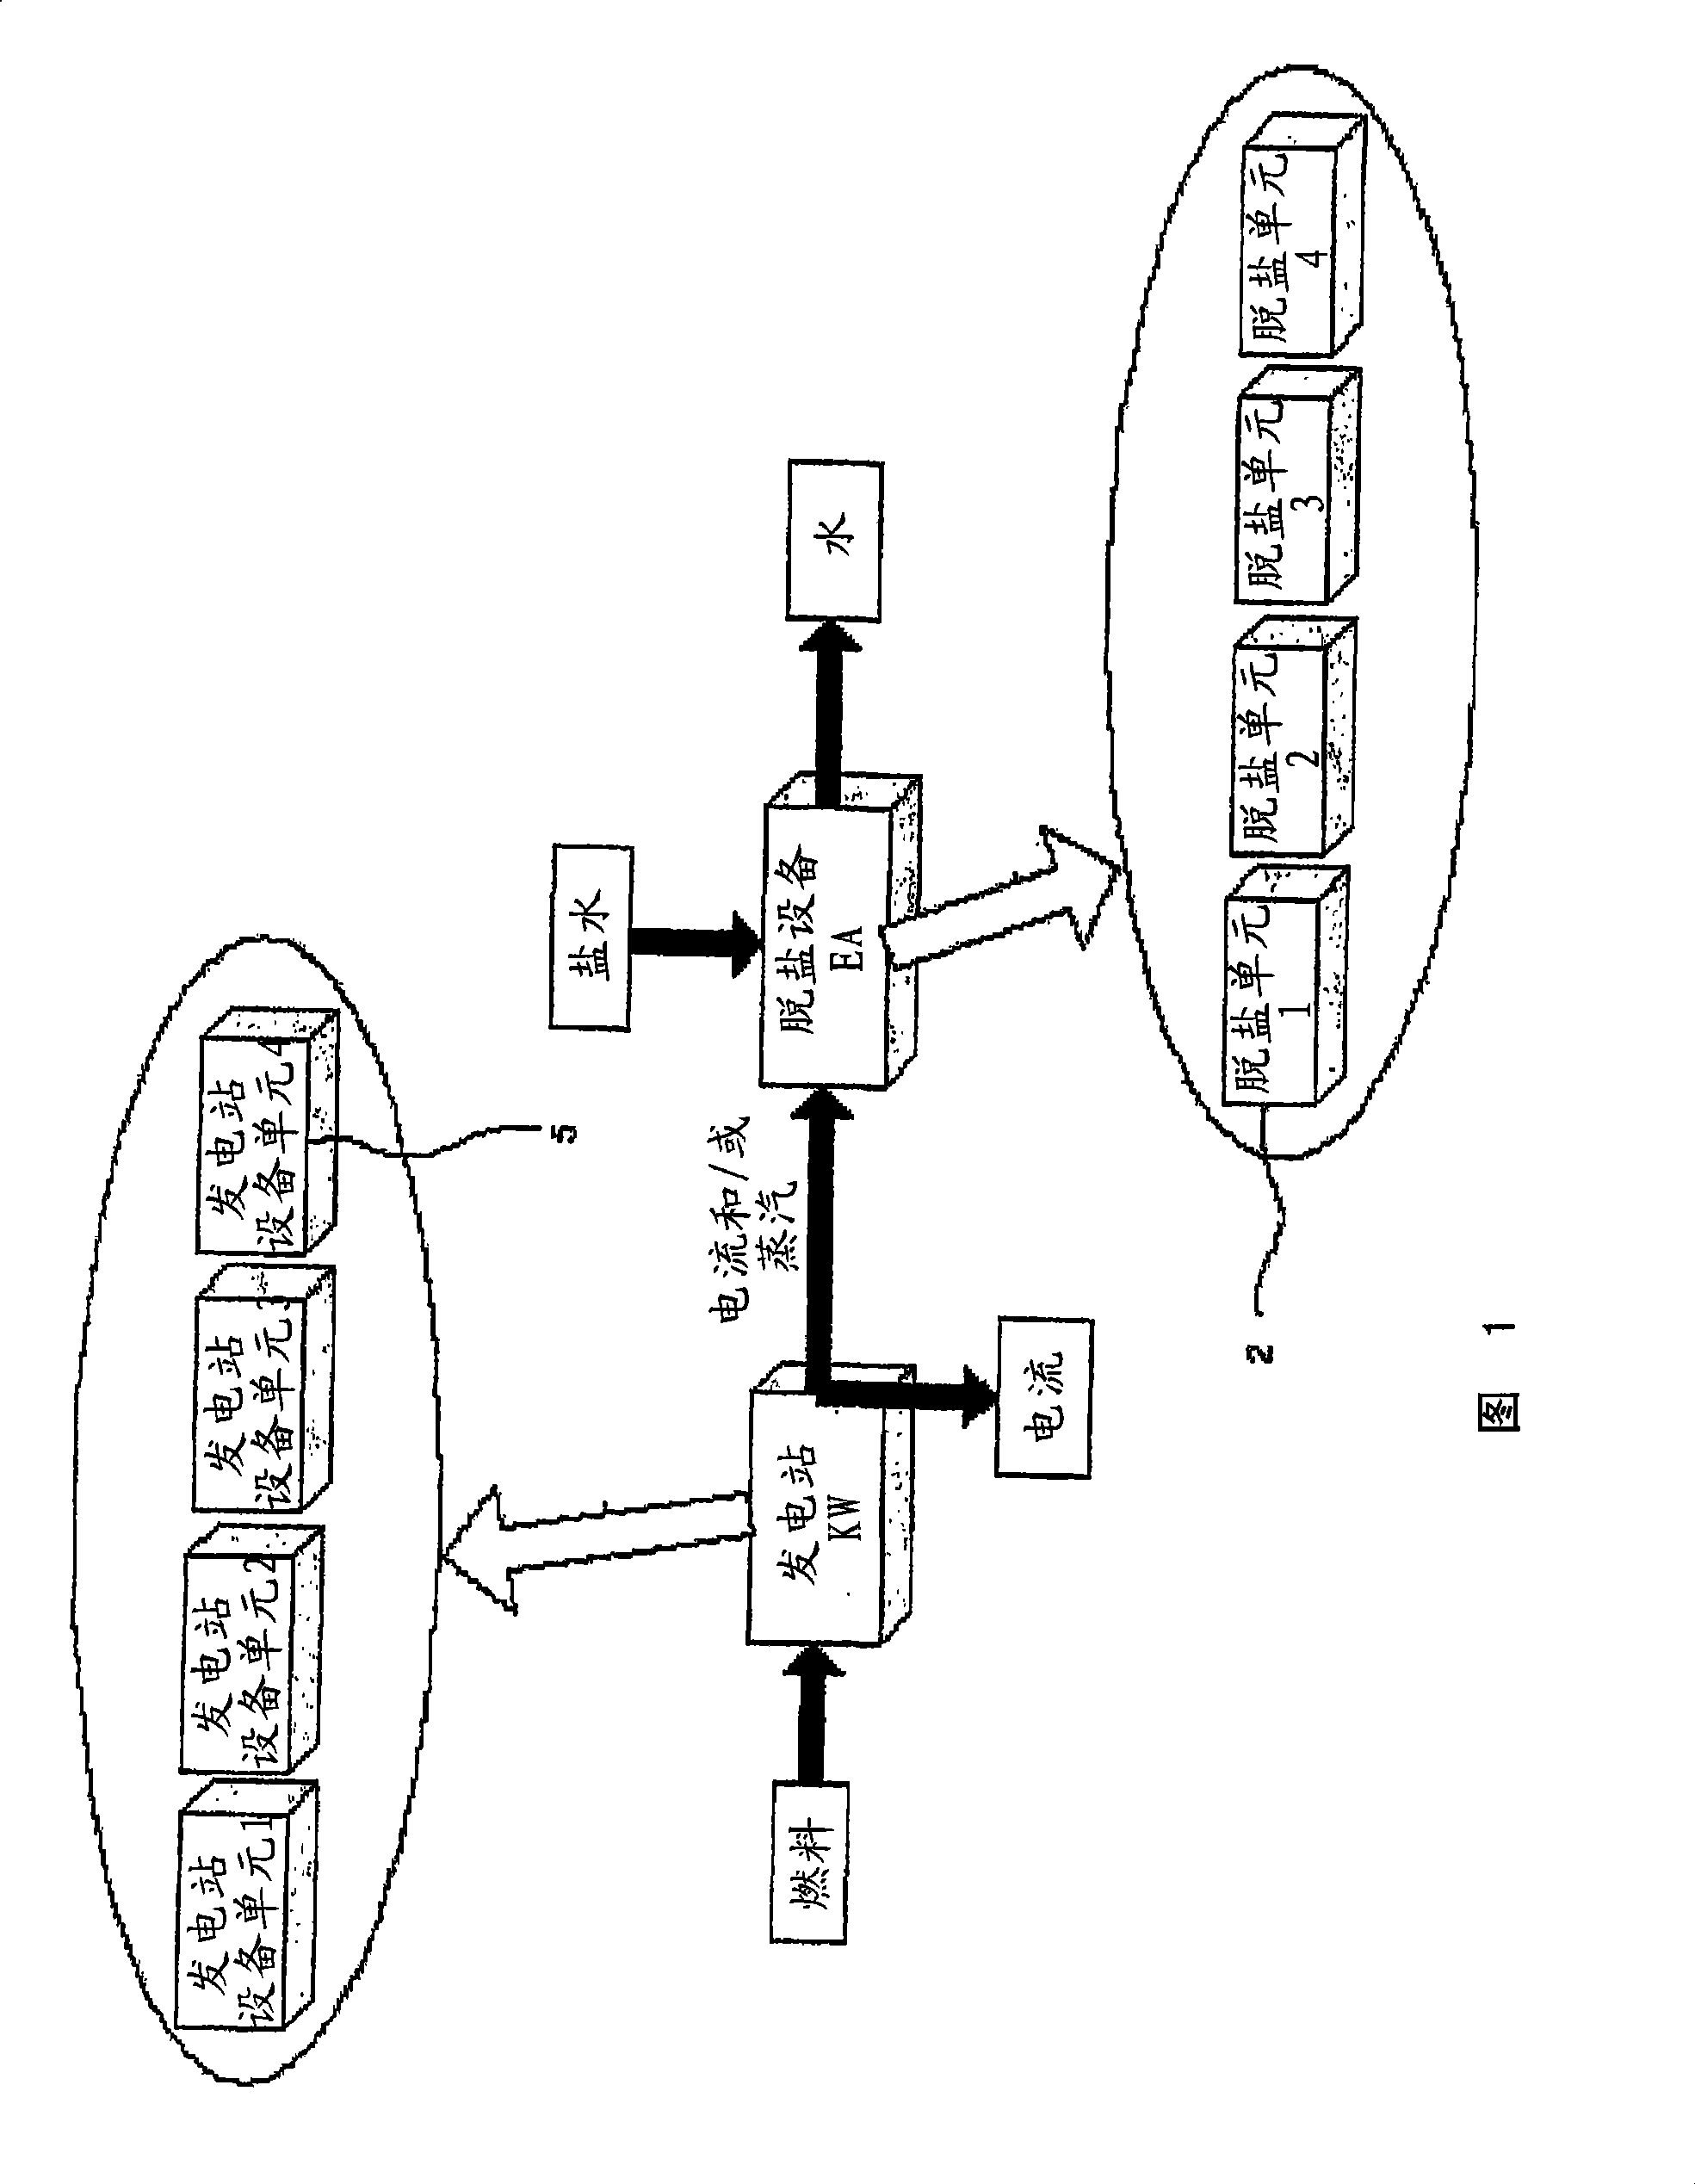 System and method for planning the operation of, monitoring processes in, simulating, and optimizing a combined power generation and water desalination plant